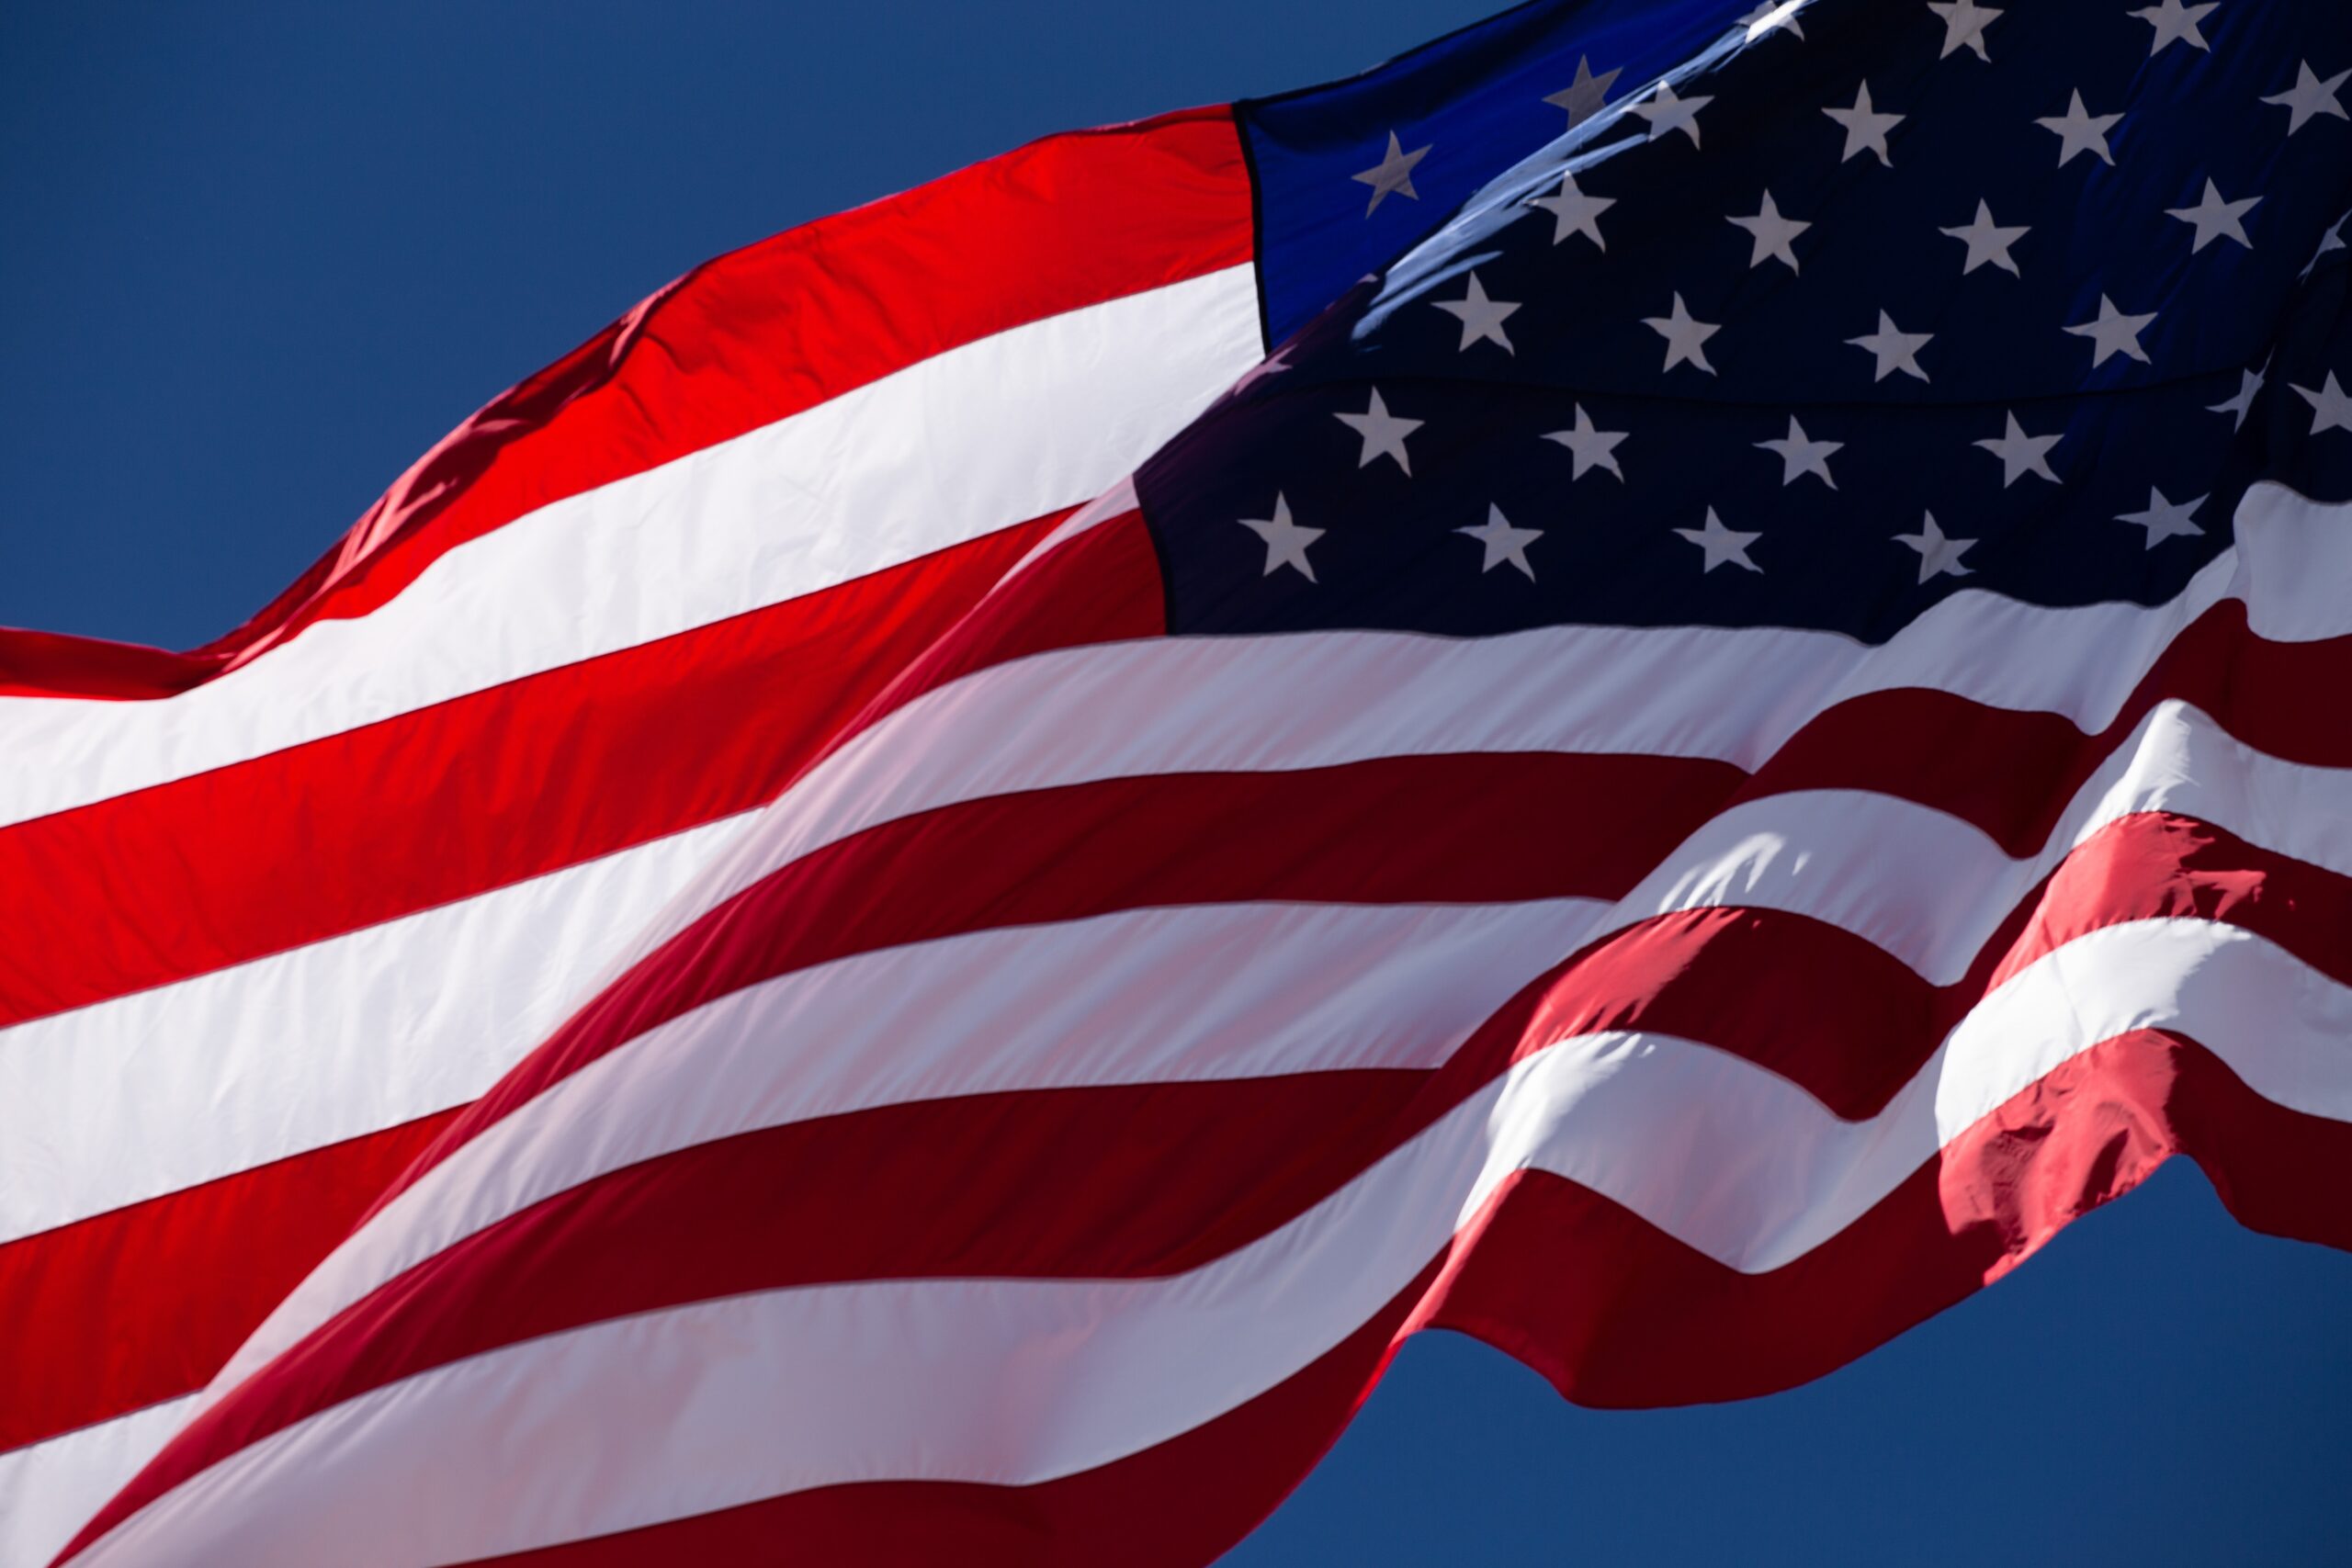 Close up image of the American Flag for the United States of America